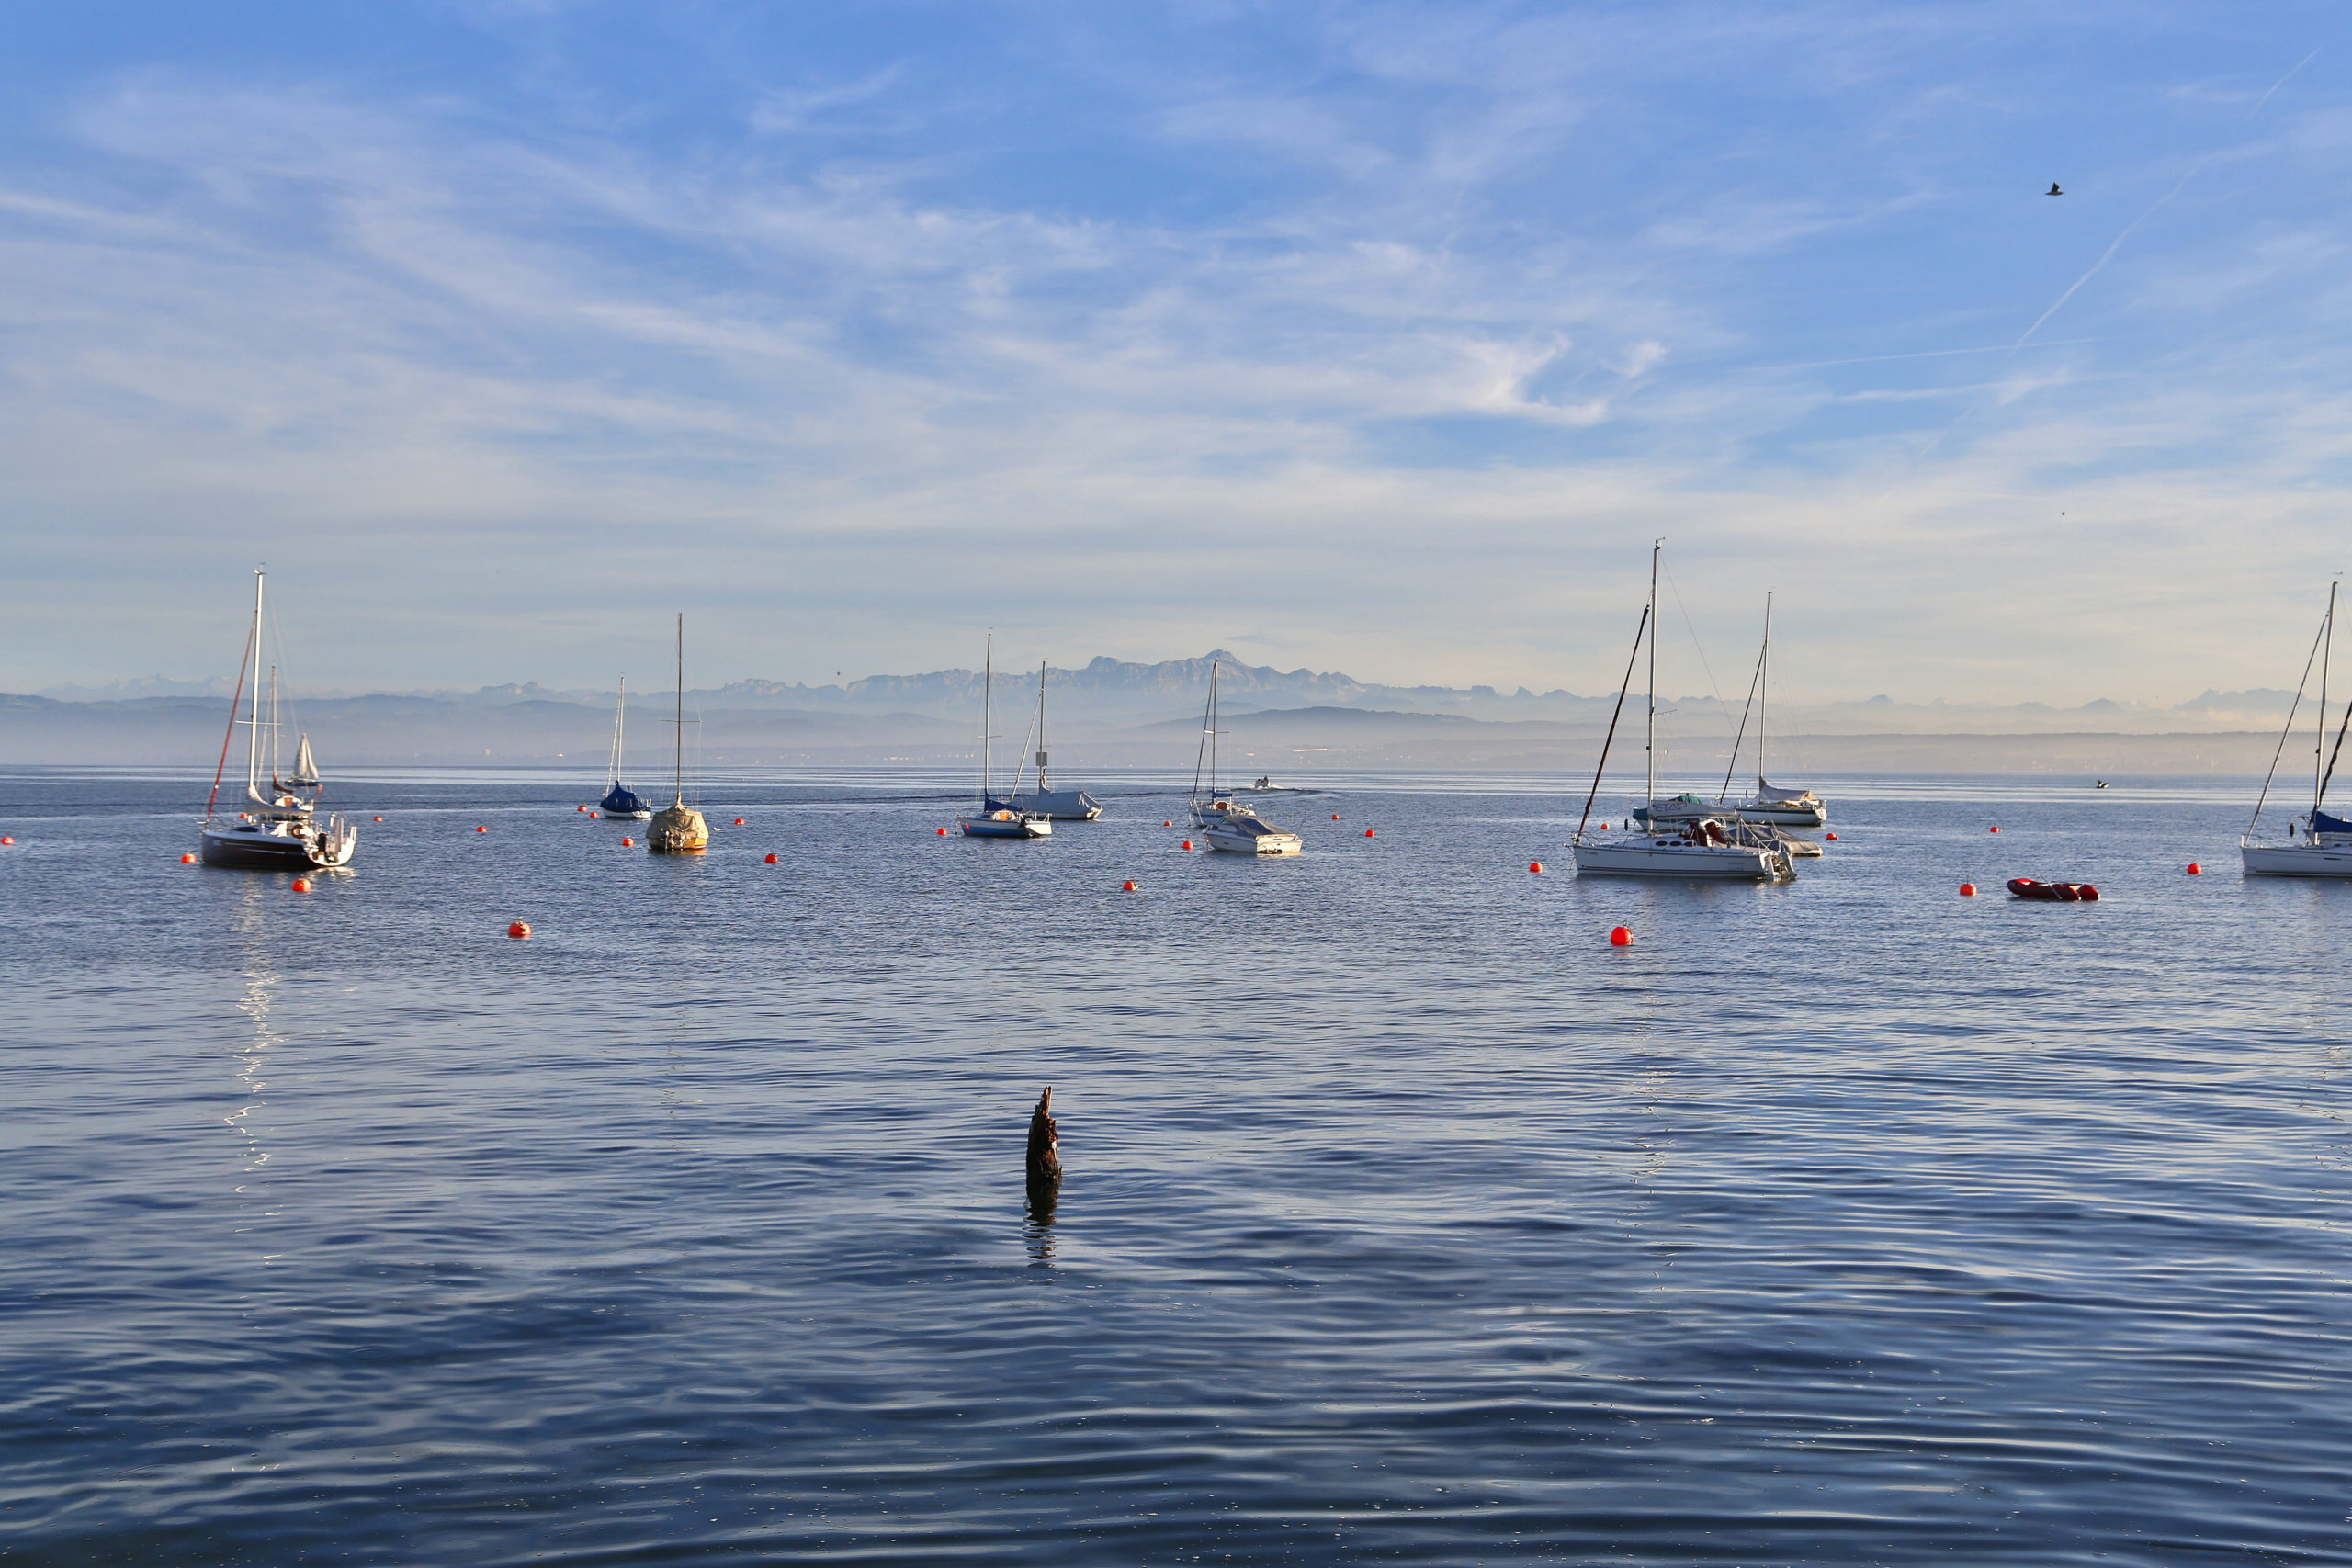 Explore Lake Constance by bike and enjoy the great view